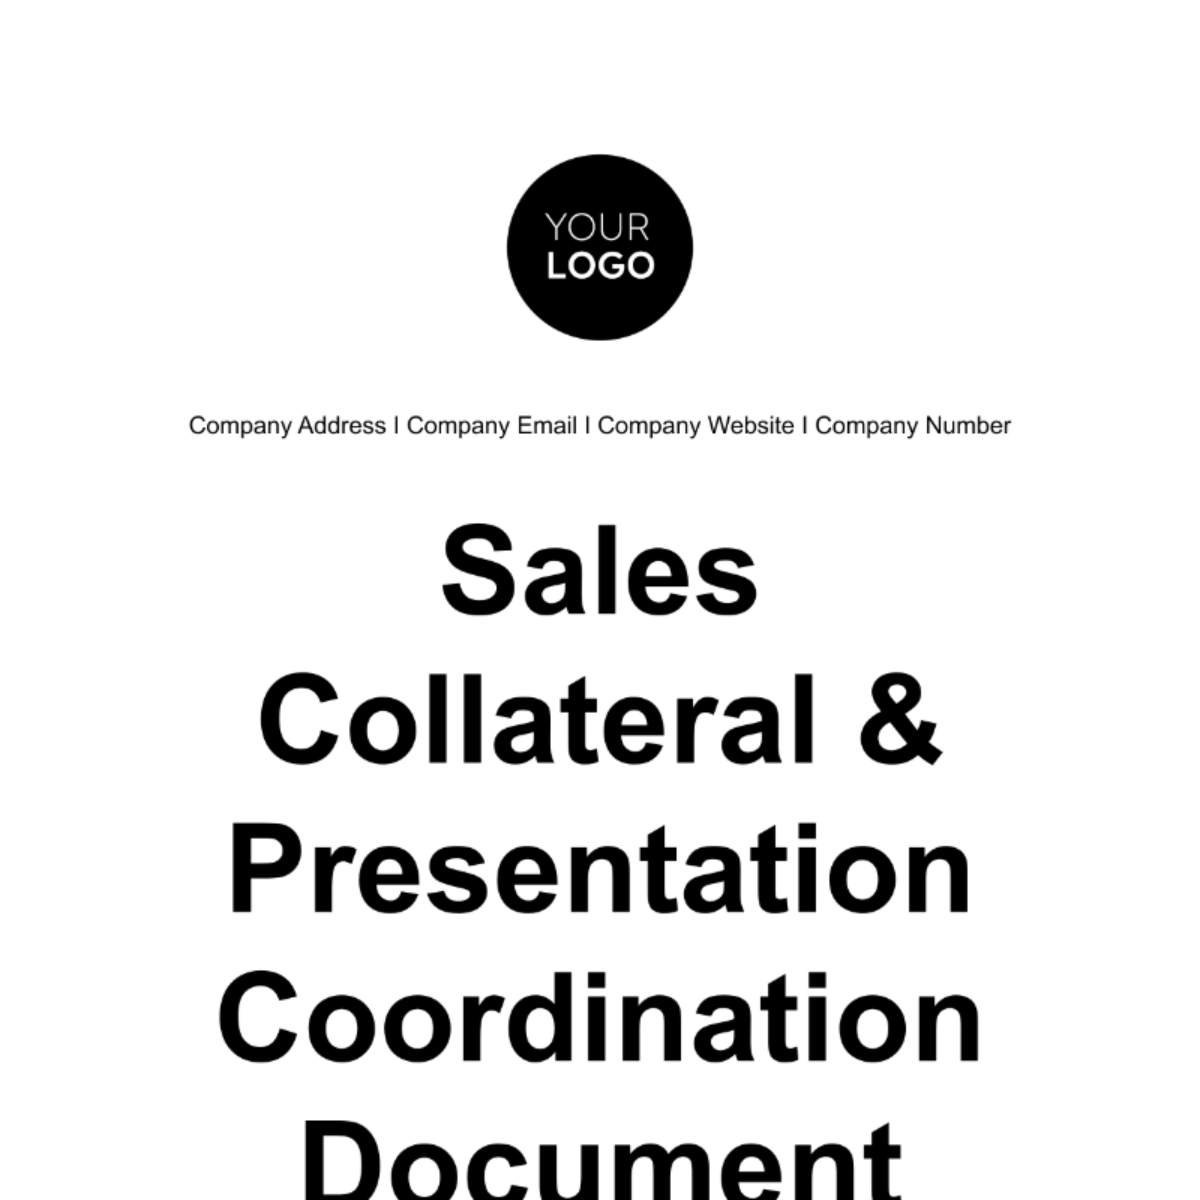 Sales Collateral & Presentation Coordination Document Template